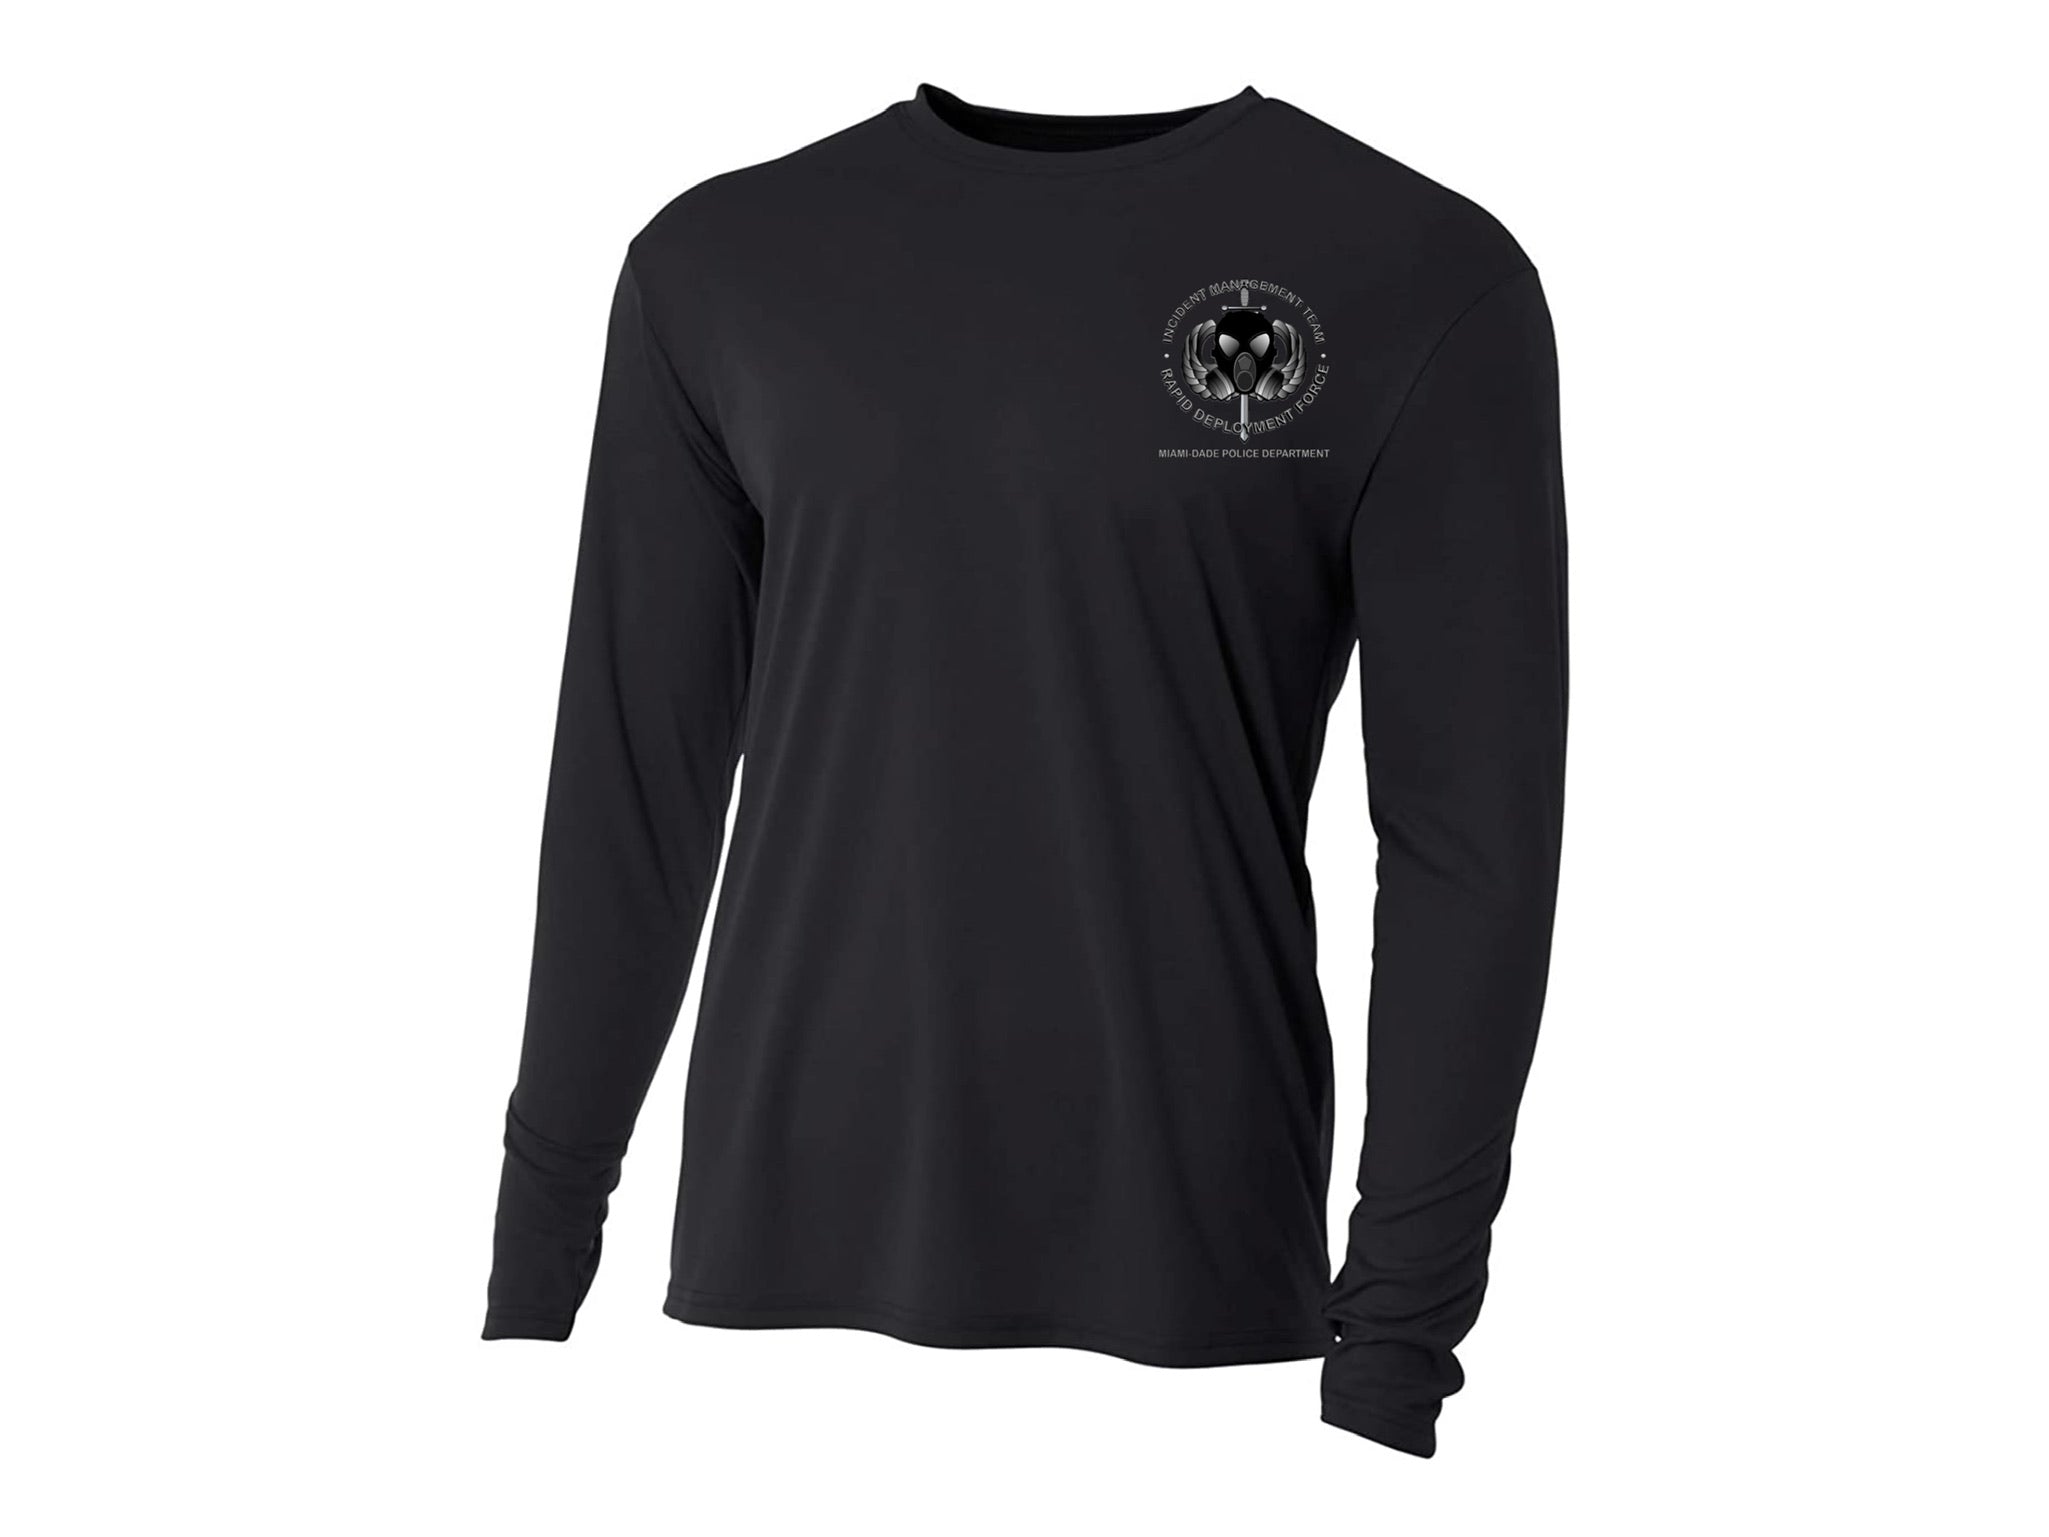 R.D.F. Cooling Performance Long Sleeve Tee